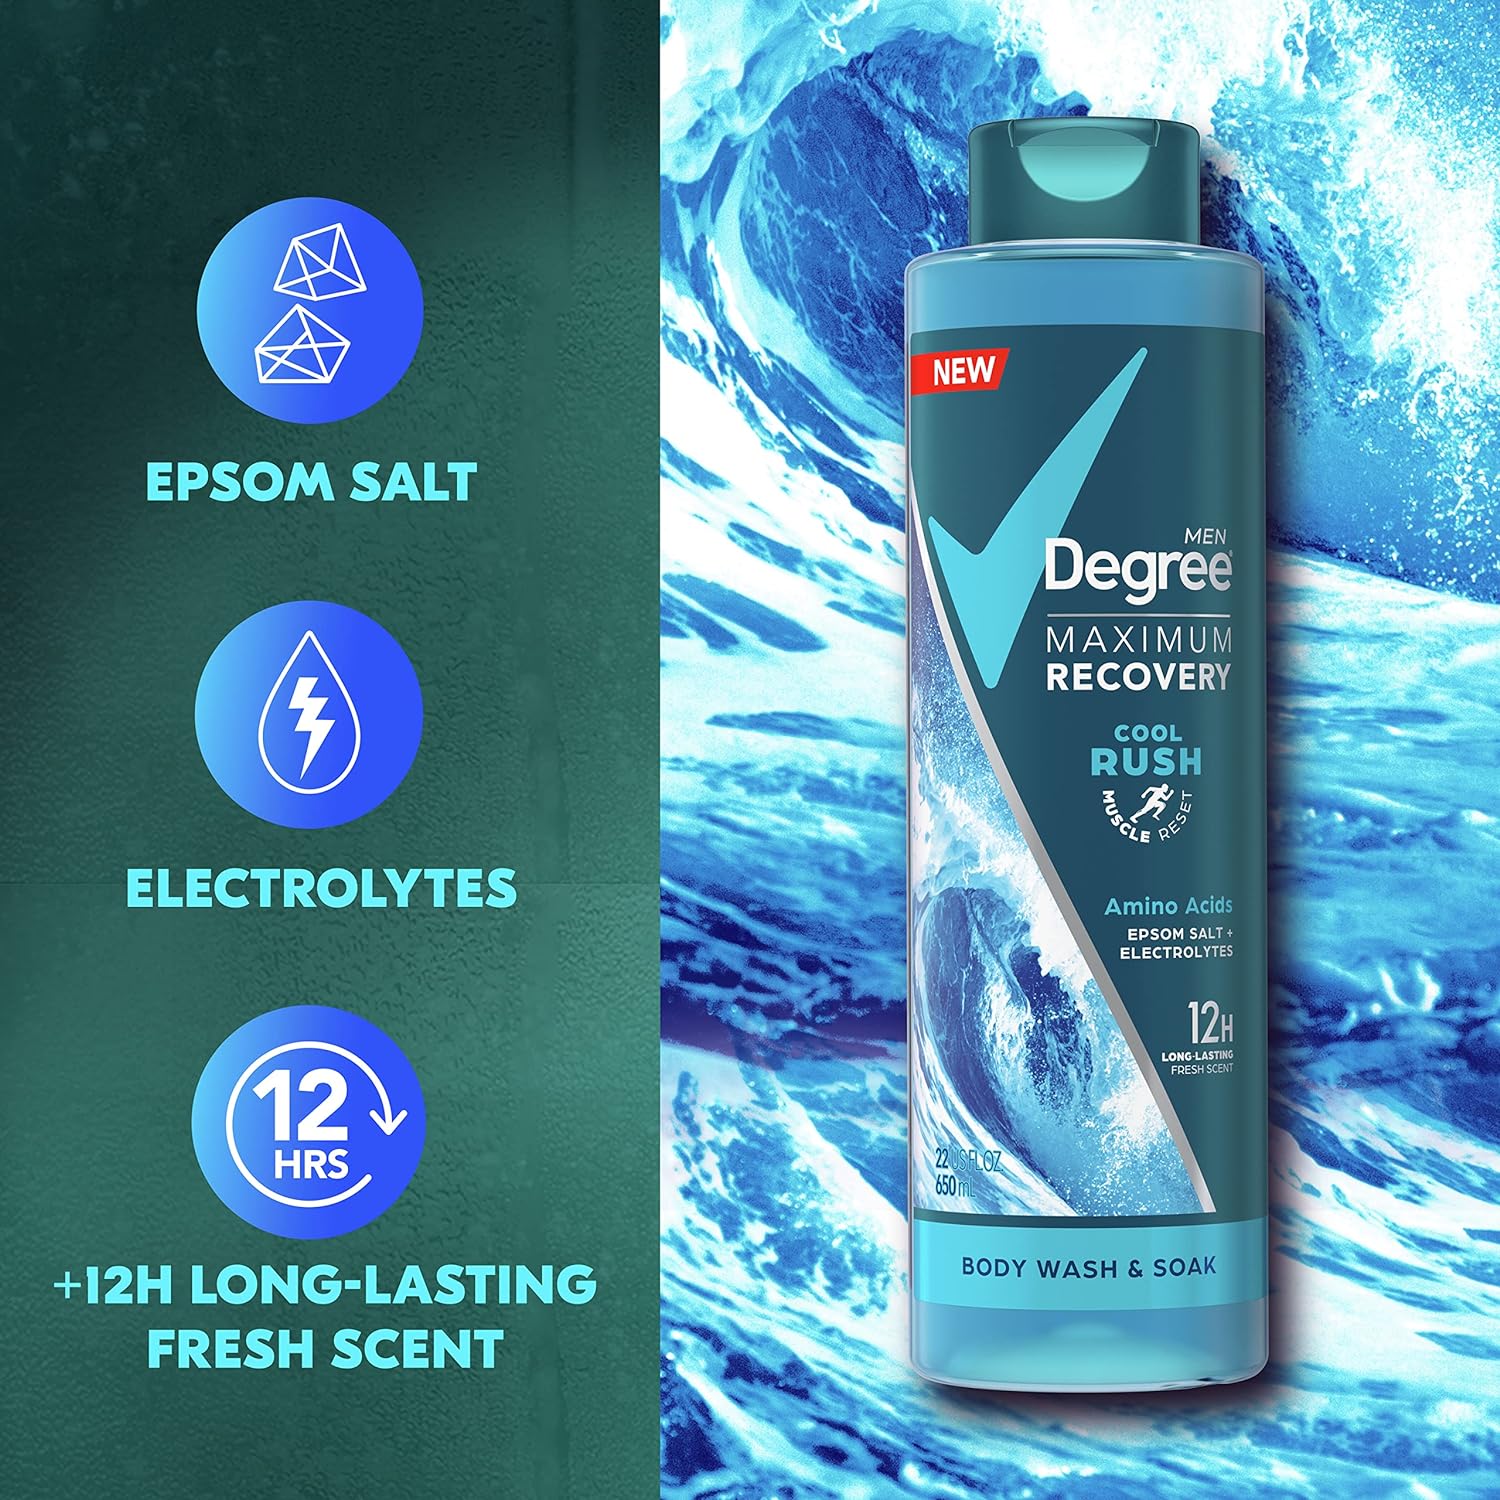 Degree Men Body Wash and Soak for Post-Workout Recovery Skincare Routine Cool Rush + Epsom Salt + Electrolytes Bath and Body Product 22 oz 4 Count : Everything Else